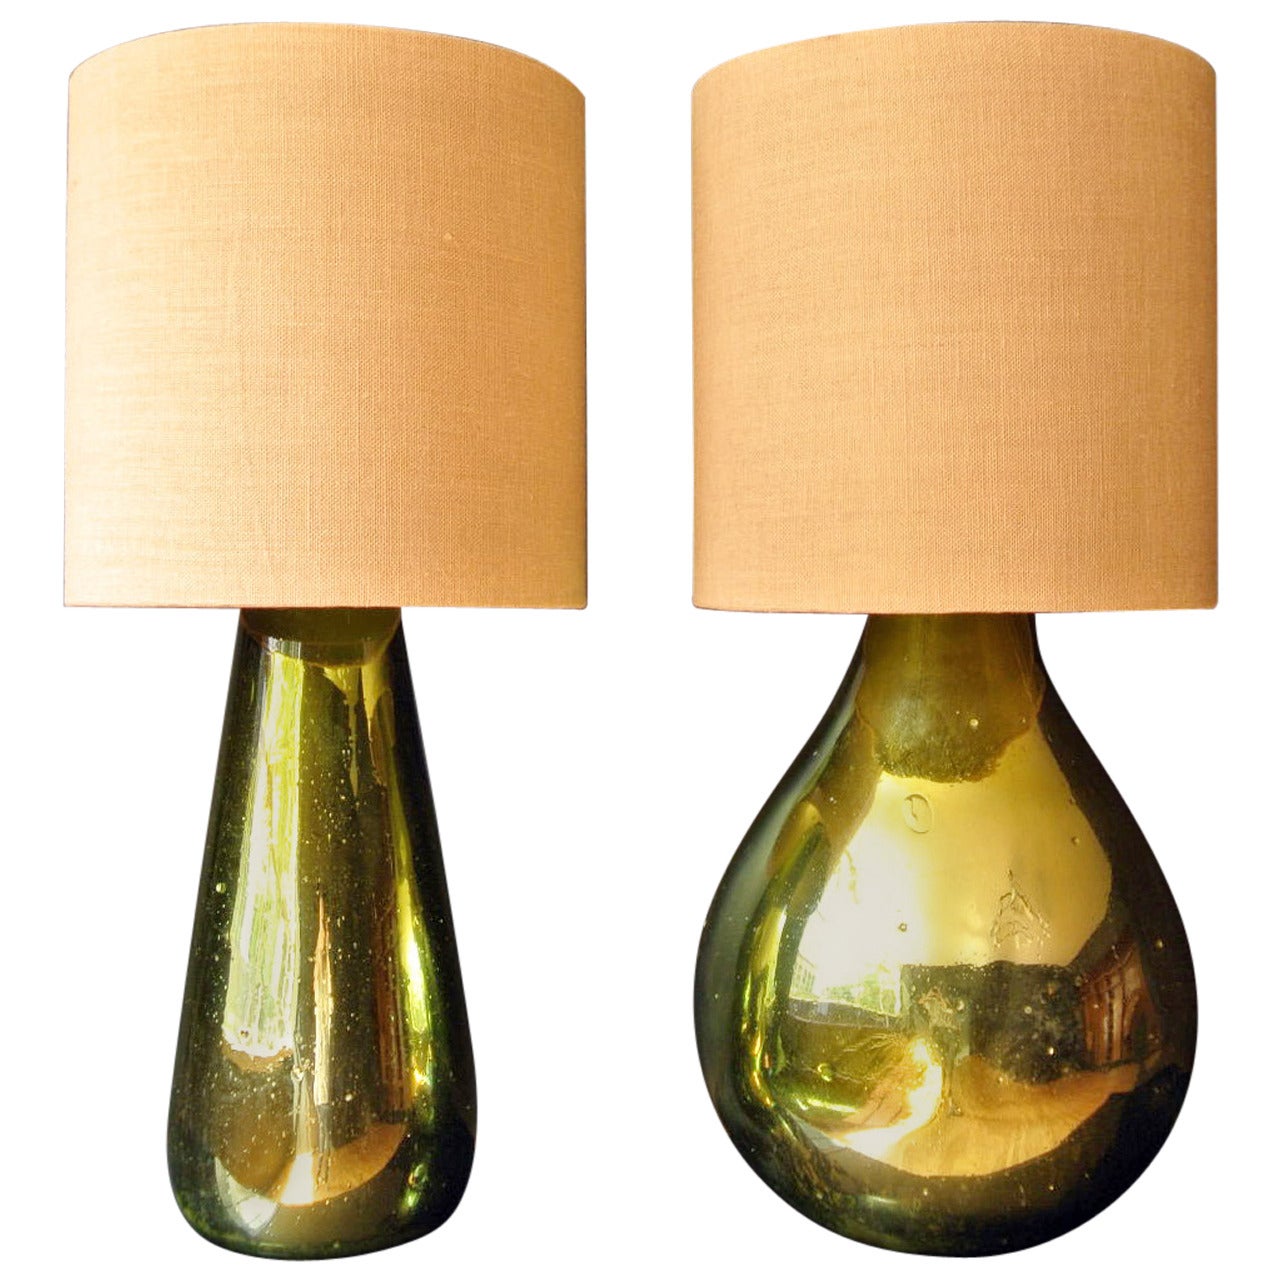 Pair of Mexican Handblown Glass Lamps